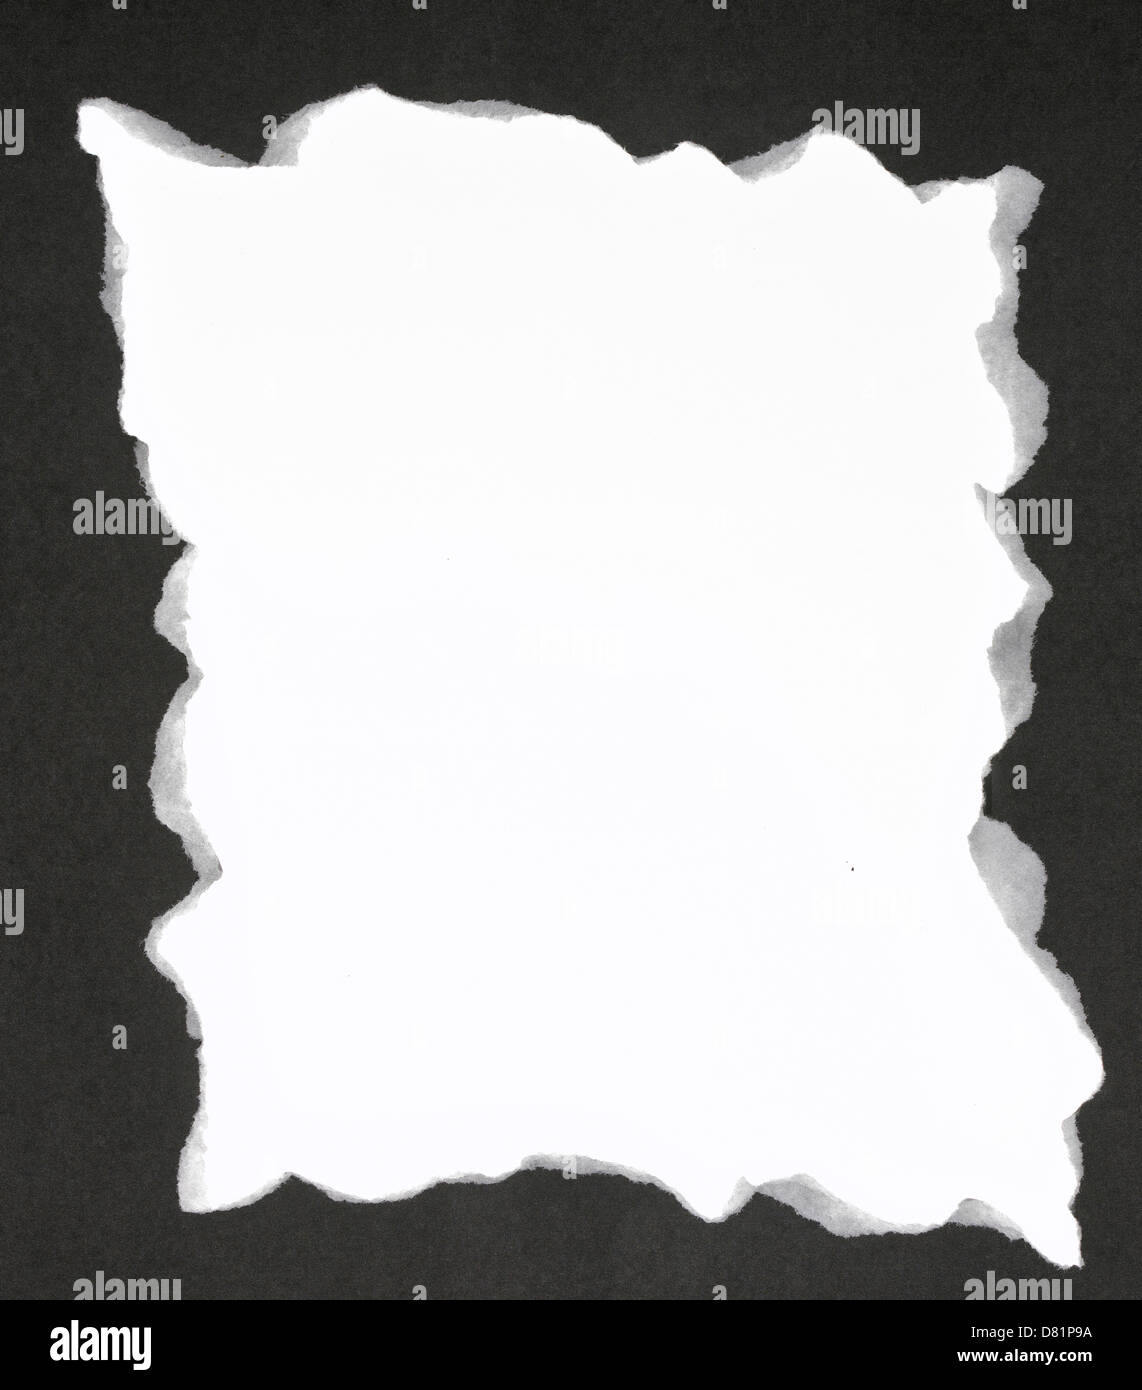 frame of black ripped paper cut out onto a white background Stock Photo -  Alamy